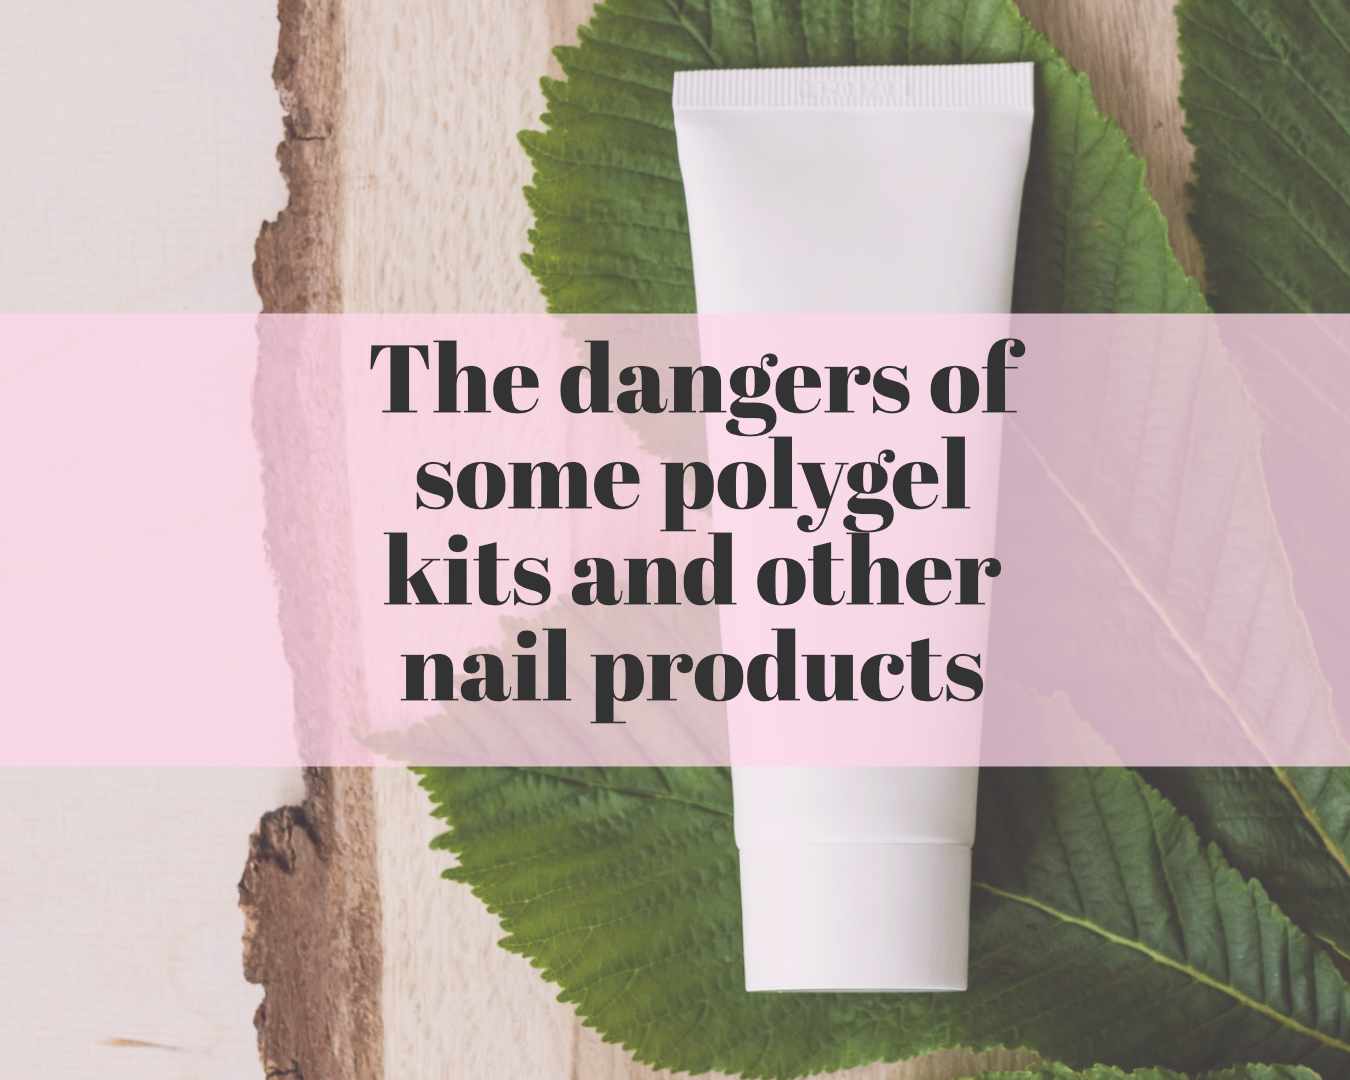 The dangers of some polygel kits and other nail products